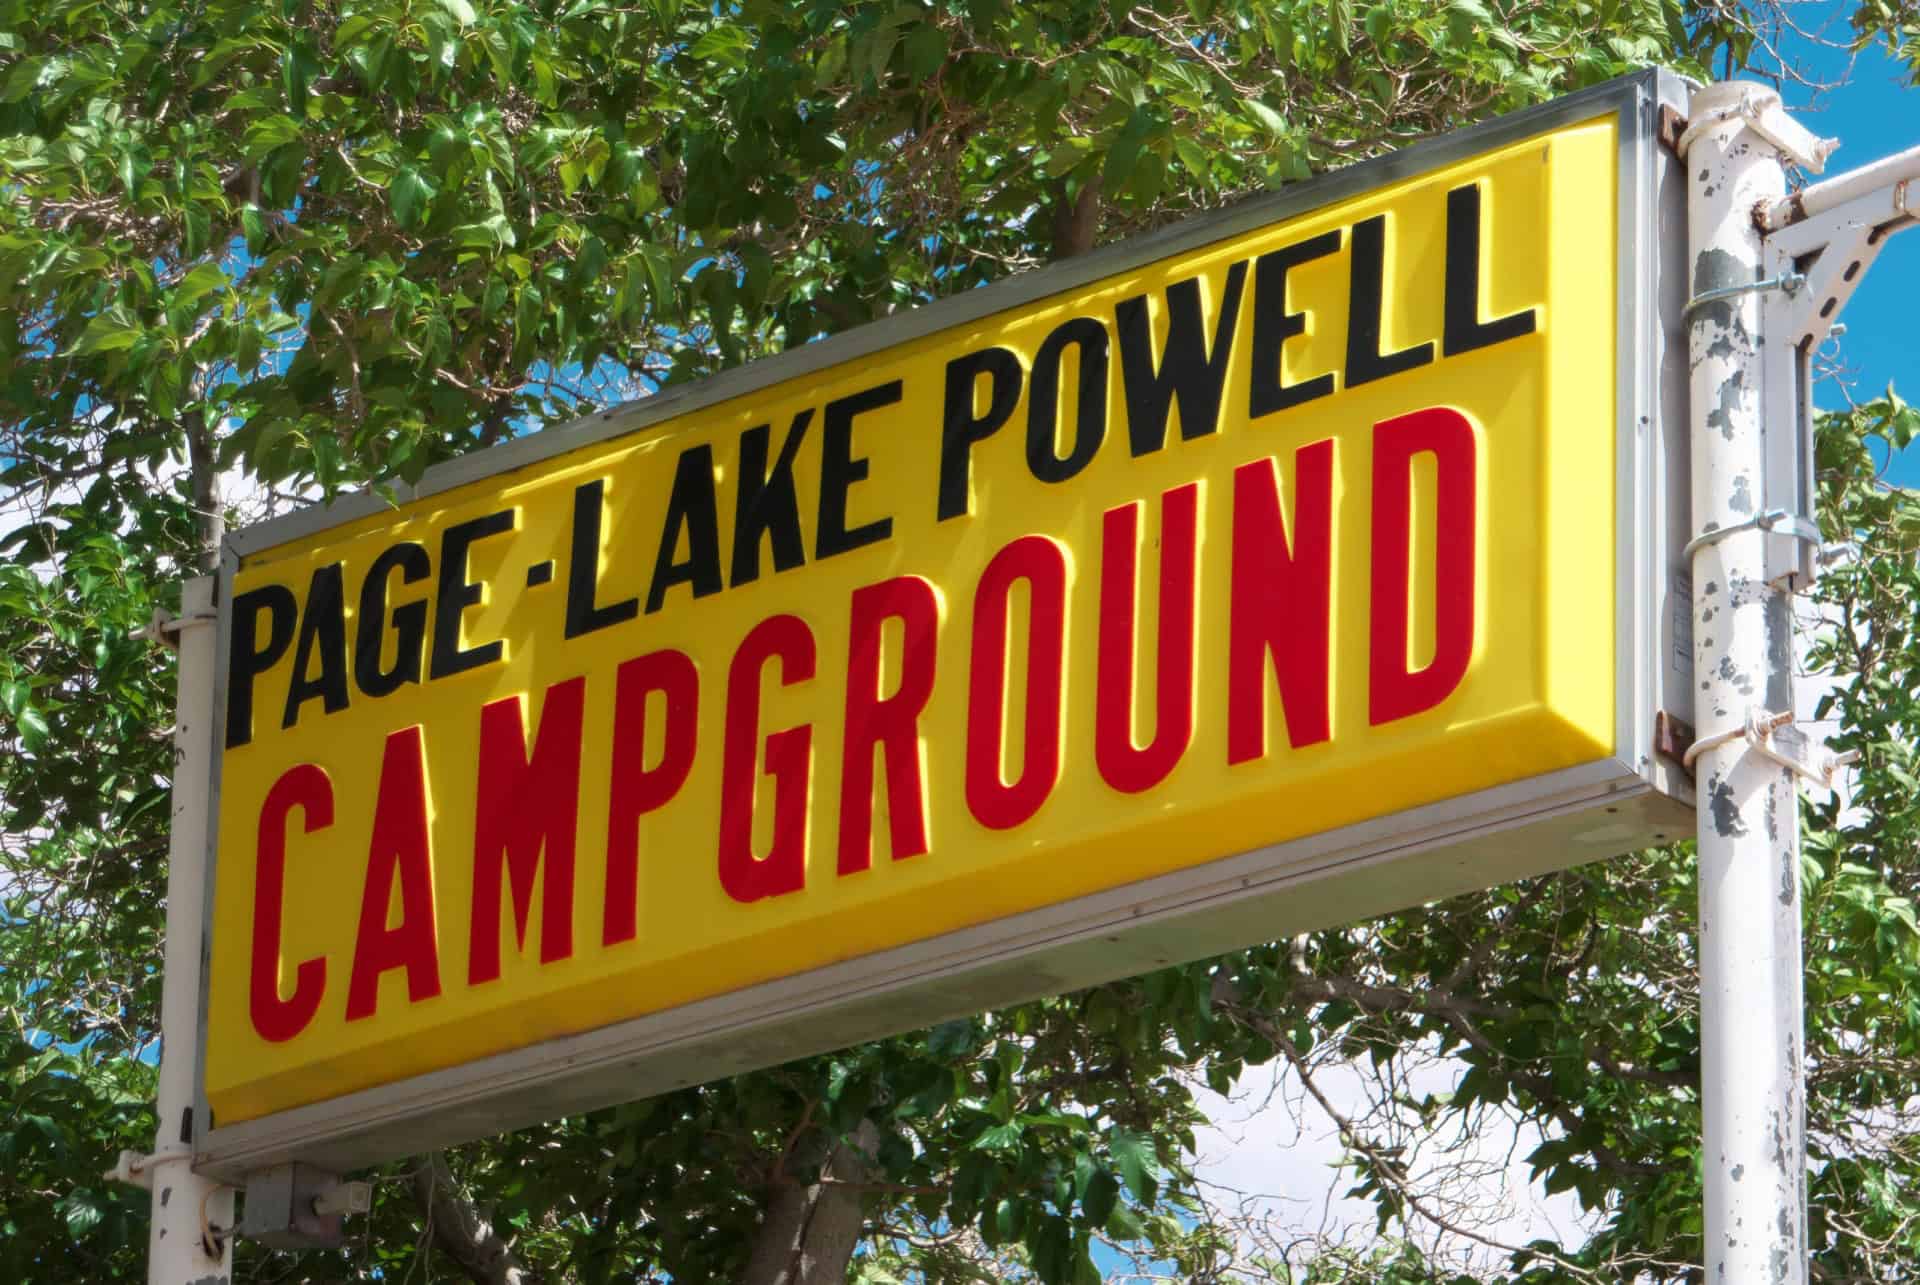 page lake powell campground